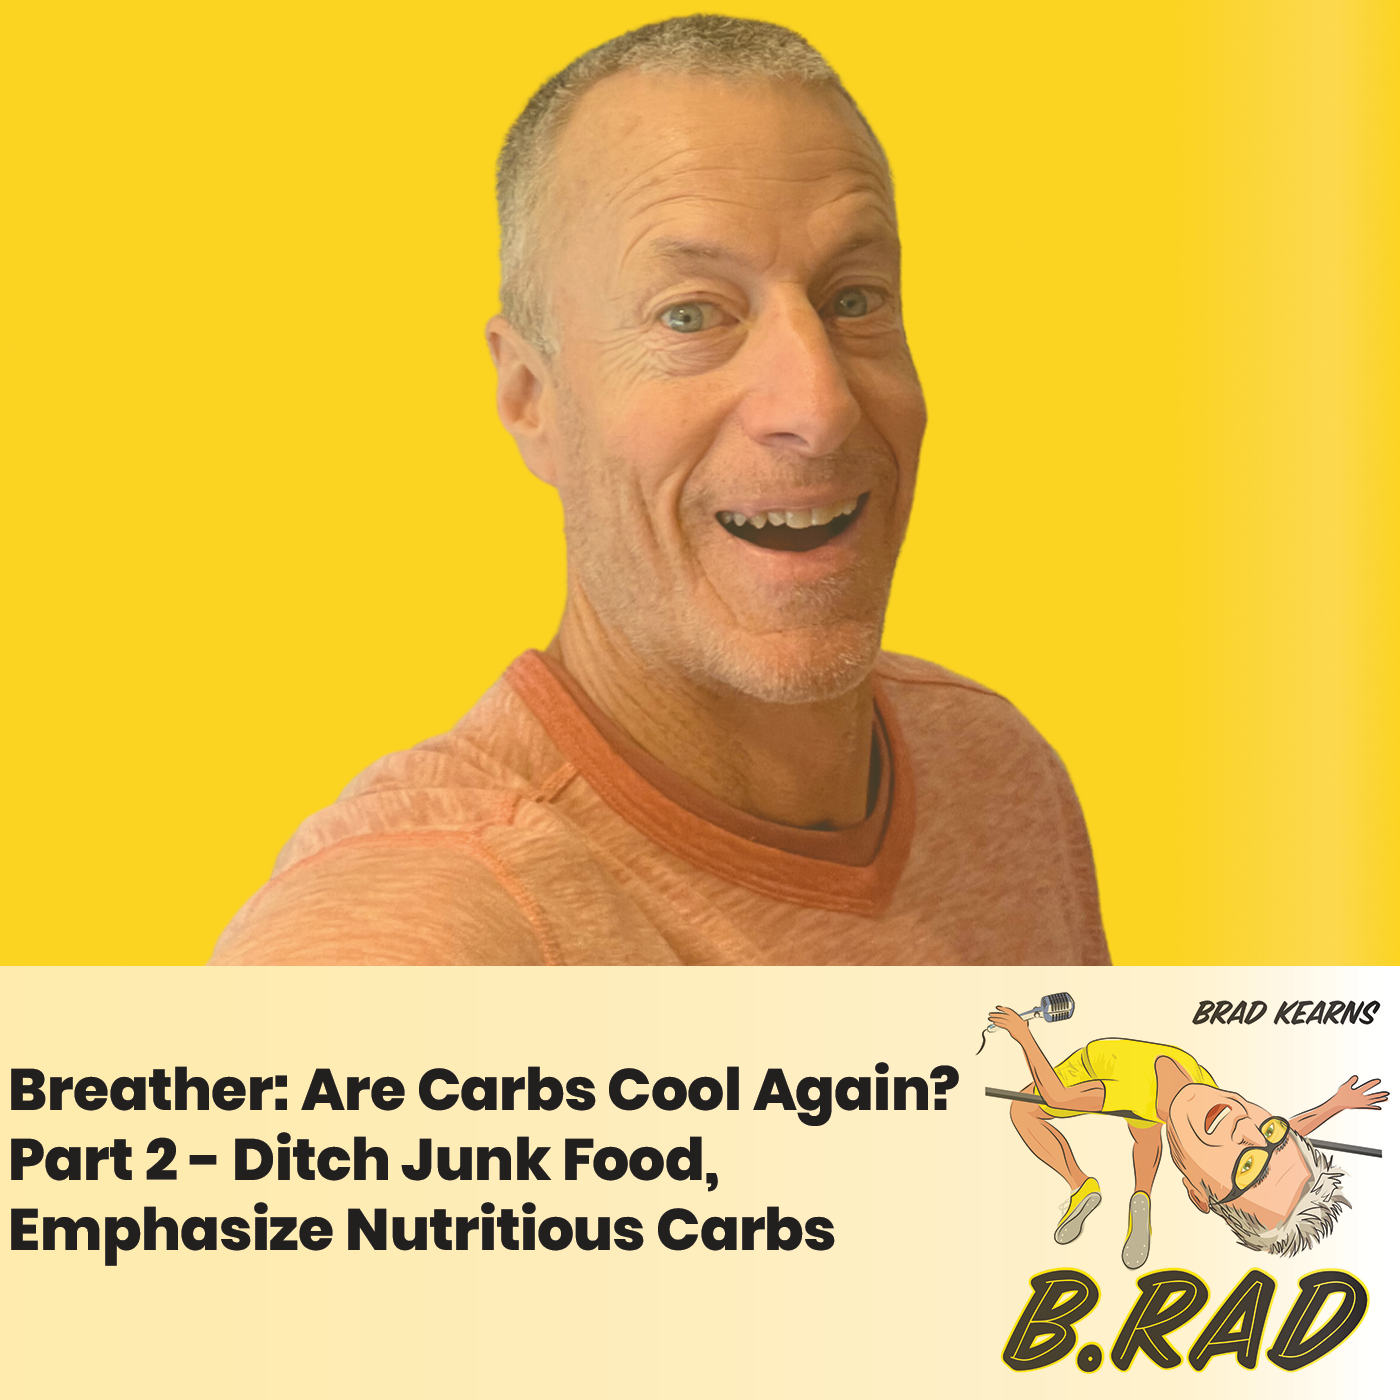 Breather: Are Carbs Cool Again? Part 2 - Ditch Junk Food, Emphasize Nutritious Carbs